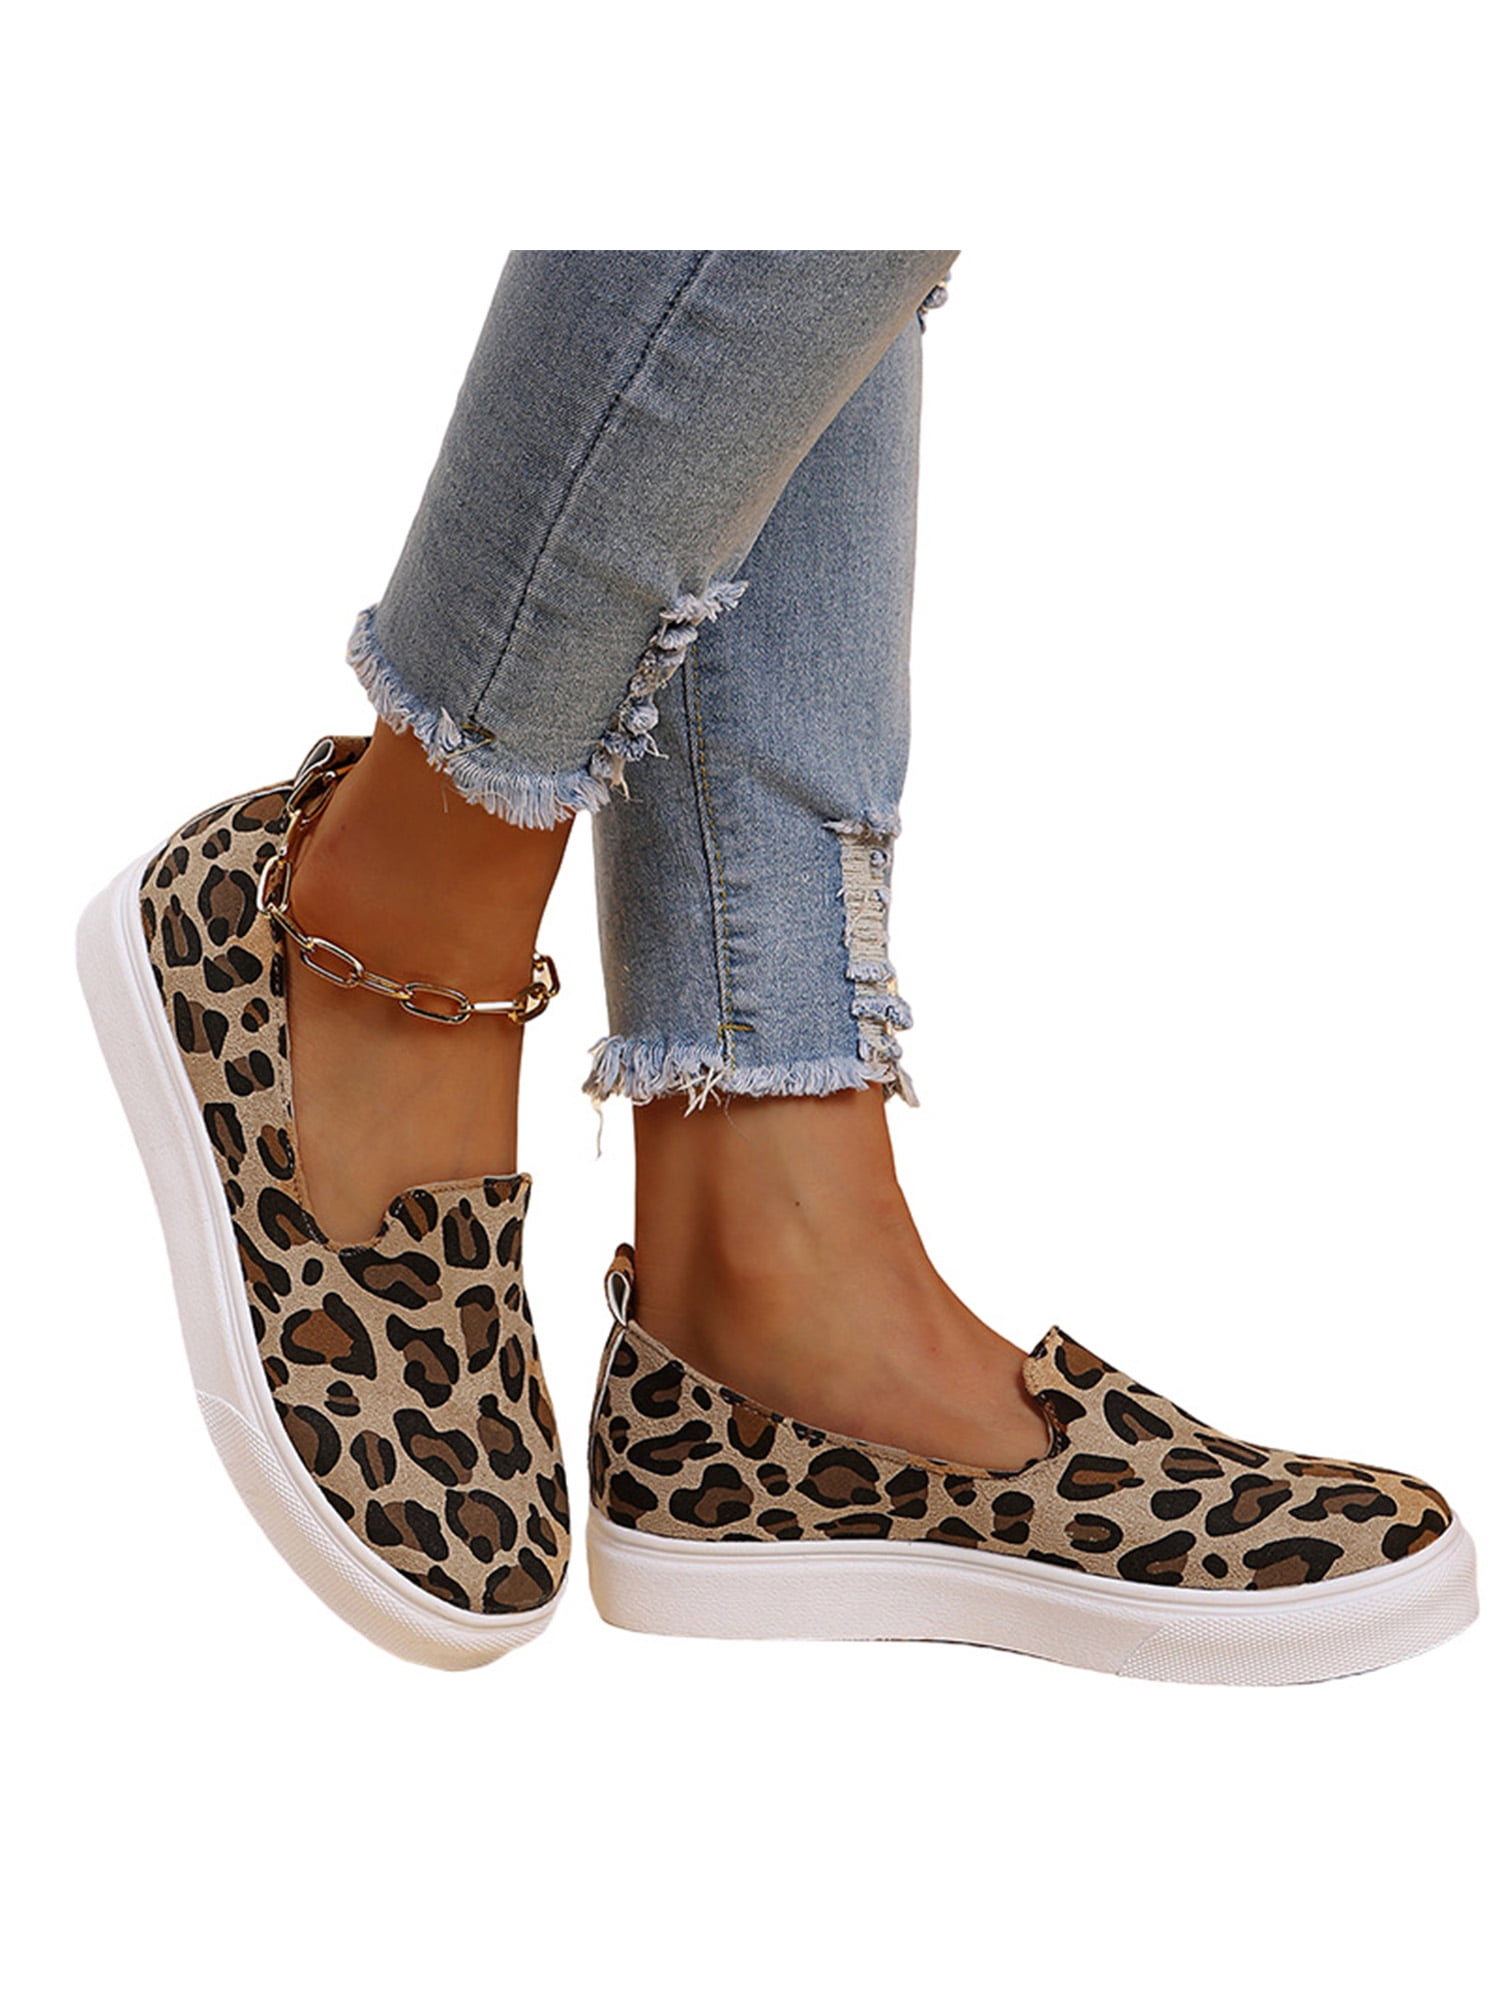 Leopard Bow Comfort Suede Flats Slip On Soft Pointed Toe Walking Women Shoes 43